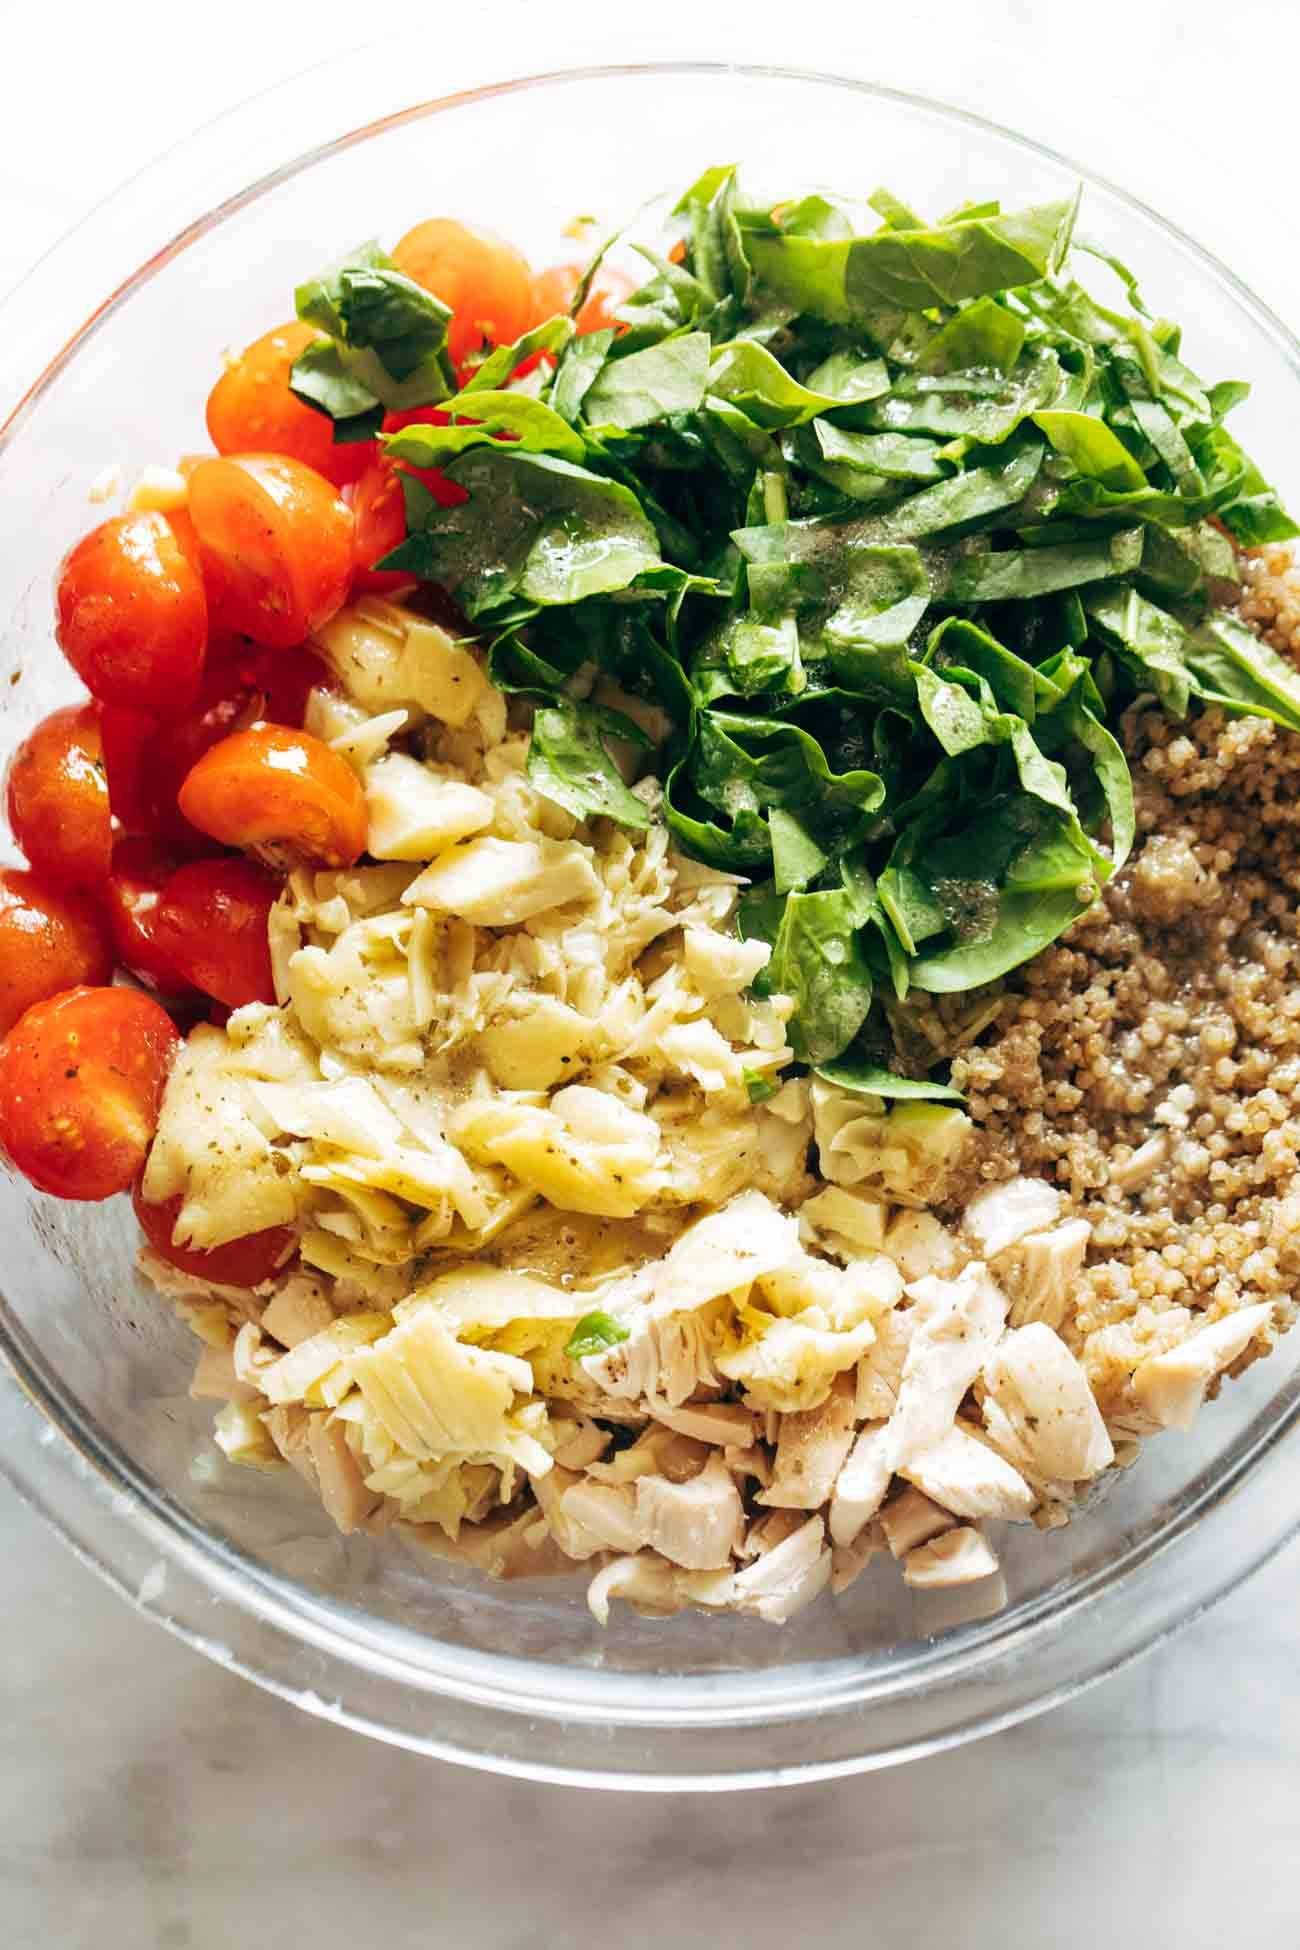 Ingredients for chicken quinoa salad in a bowl